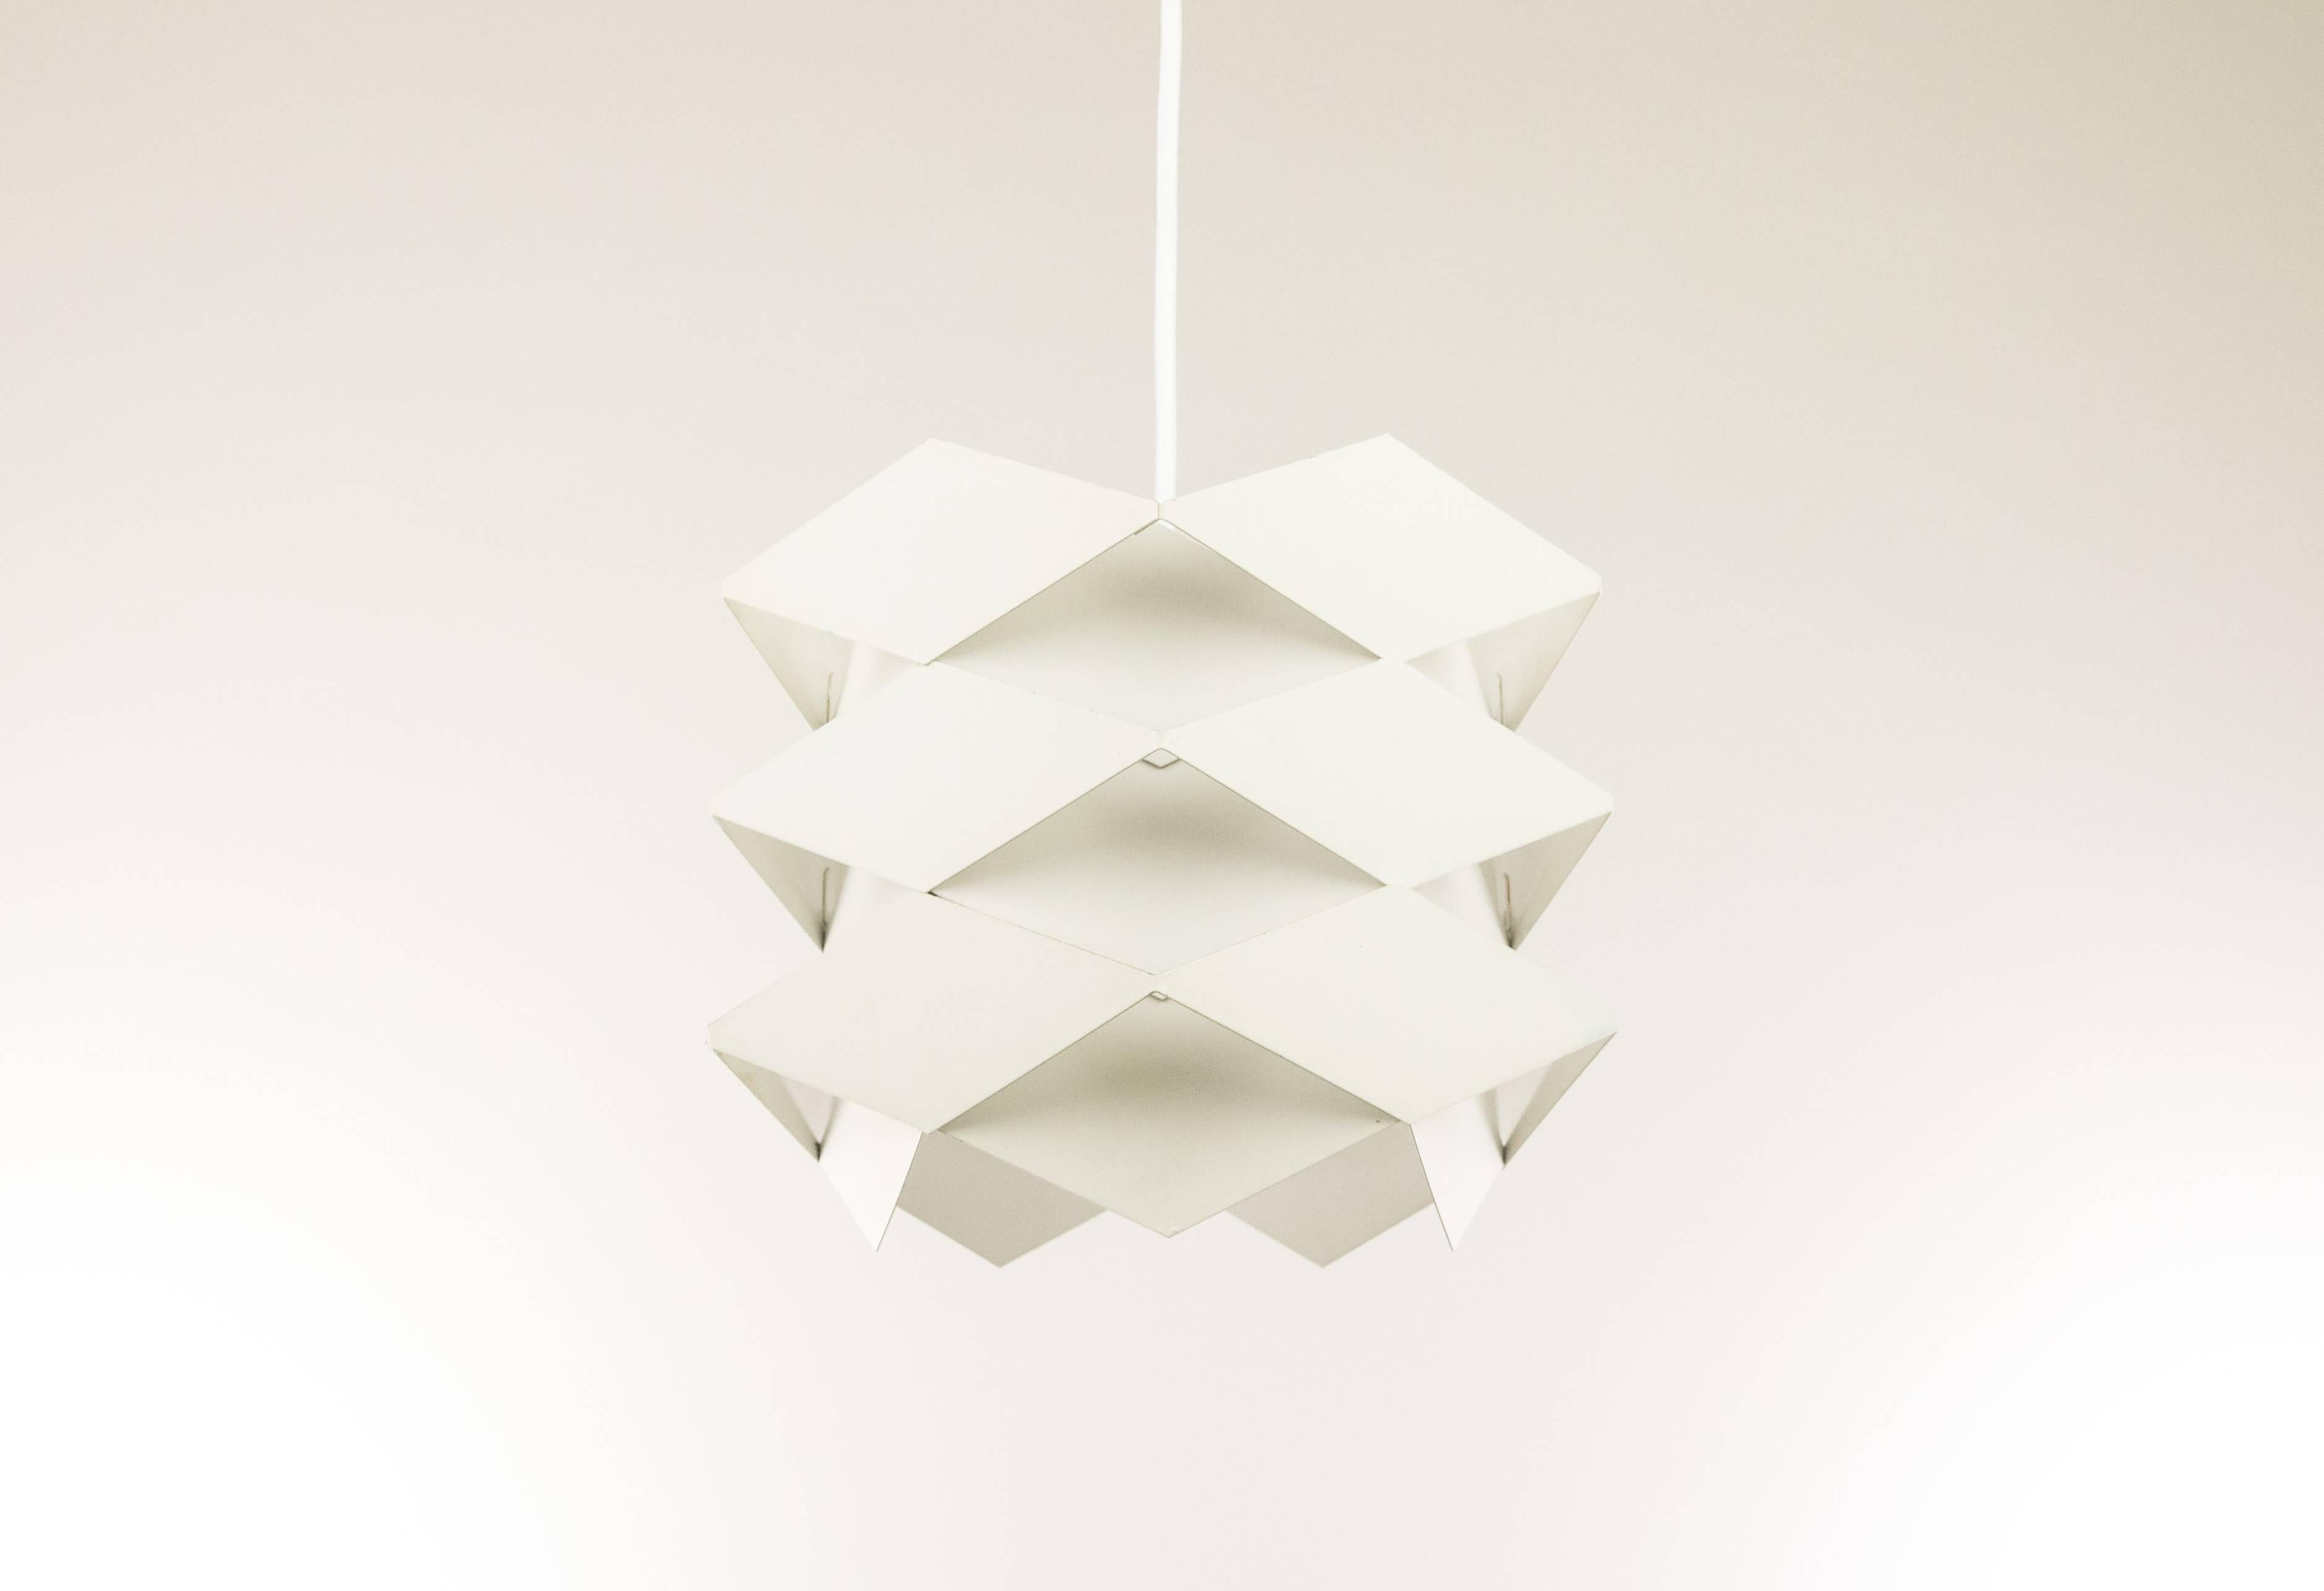 White pendant designed by Preben Dahl in the 1960s and produced by Hans Følsgaard Belysning. The diamond-shaped steel elements are reminiscent of the Symfoni lighting series that Dahl designed before this model. The design with the vertical slats is